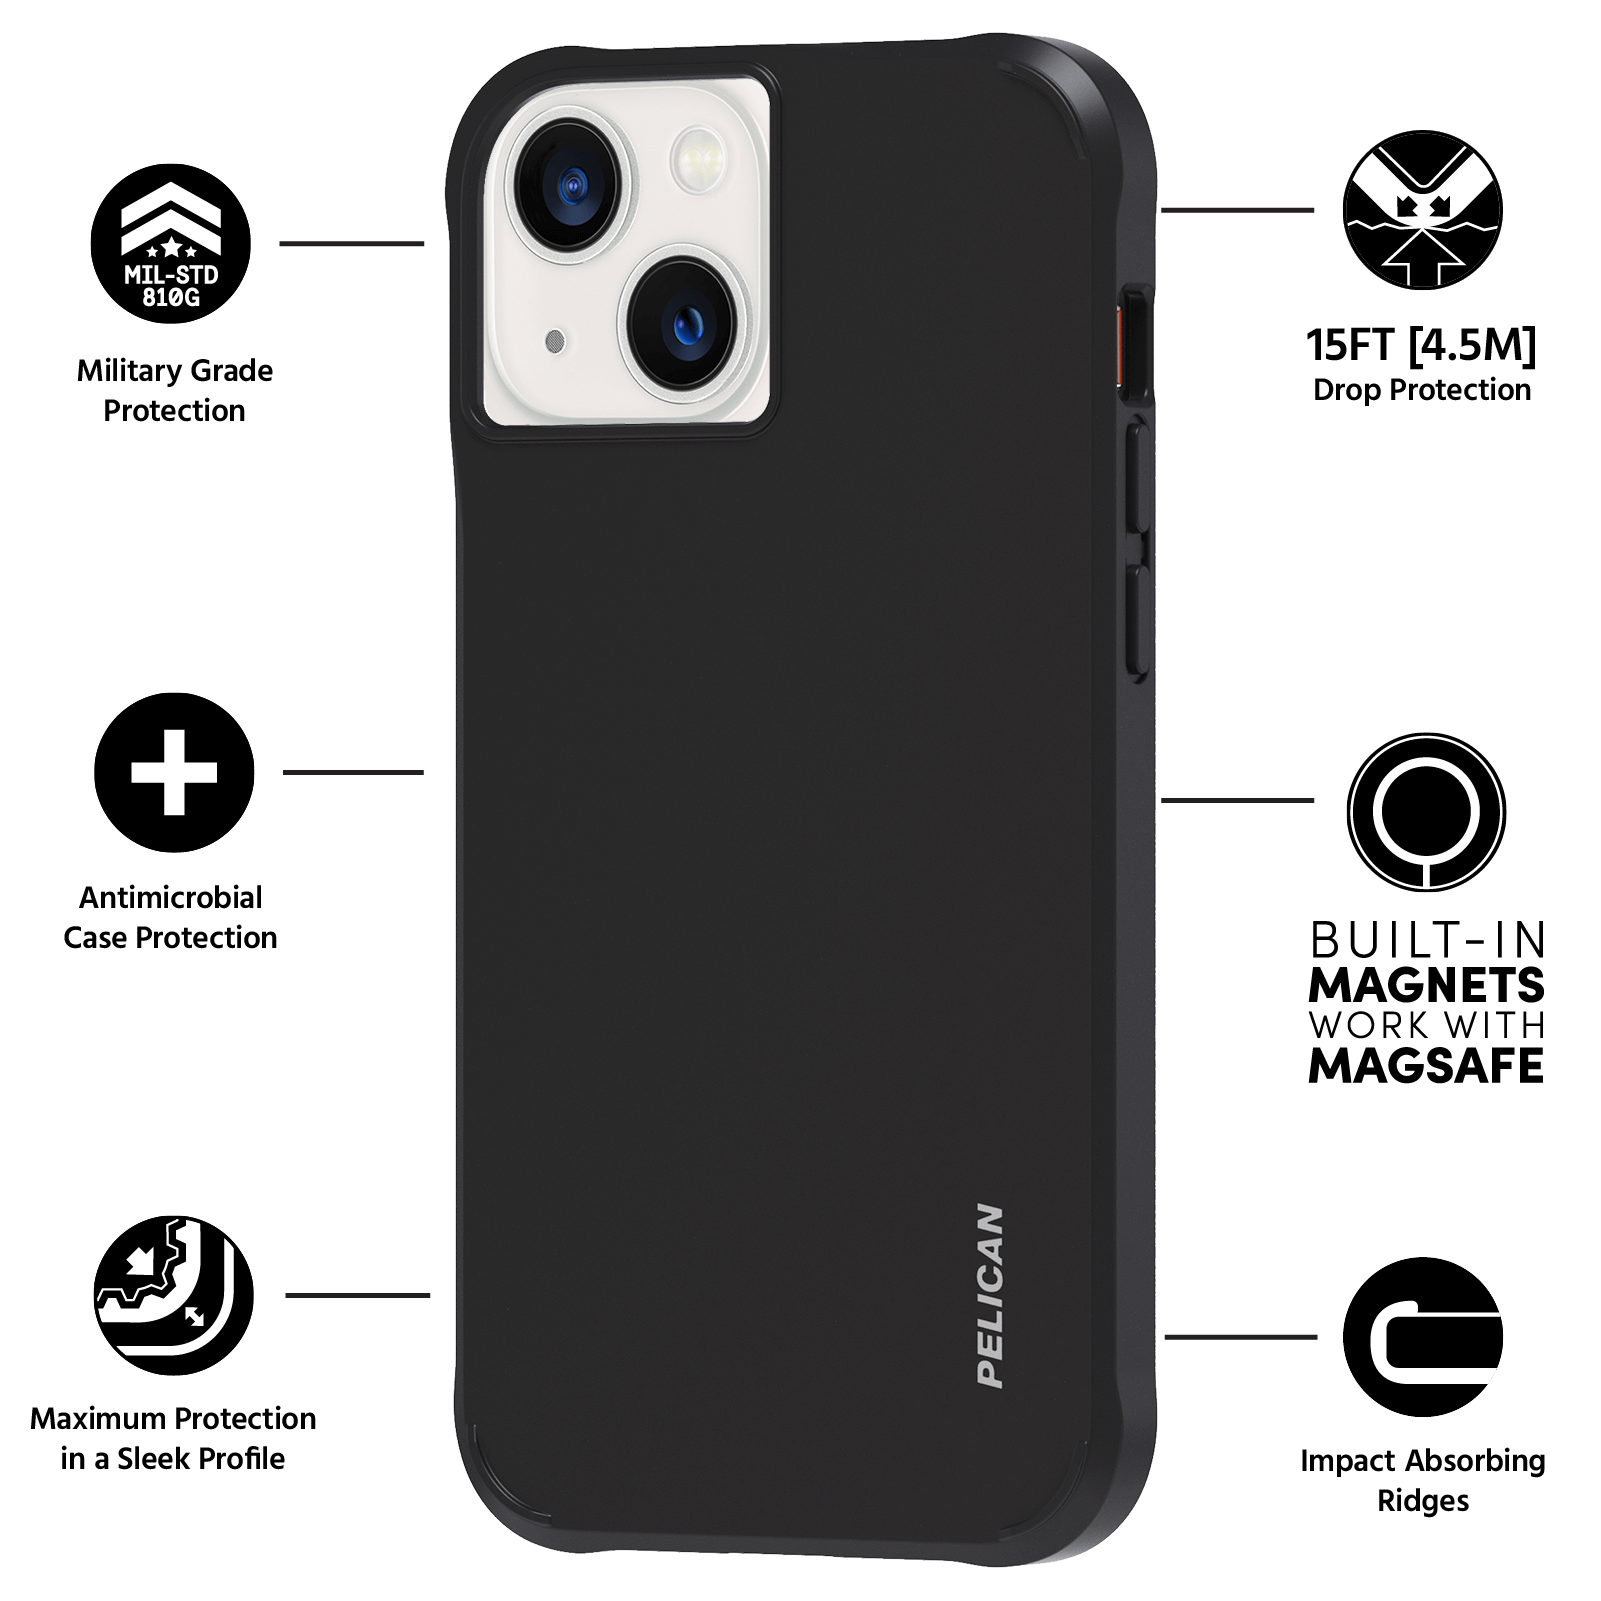 Military Grade Protection, Antimicrobial Case Protection, Maximum Protection in a Sleek Profile, 15FT [4.5M] Drop Protection, Built-In Magnets work with MagSafe, Impact Absorbing Ridges. color::Black